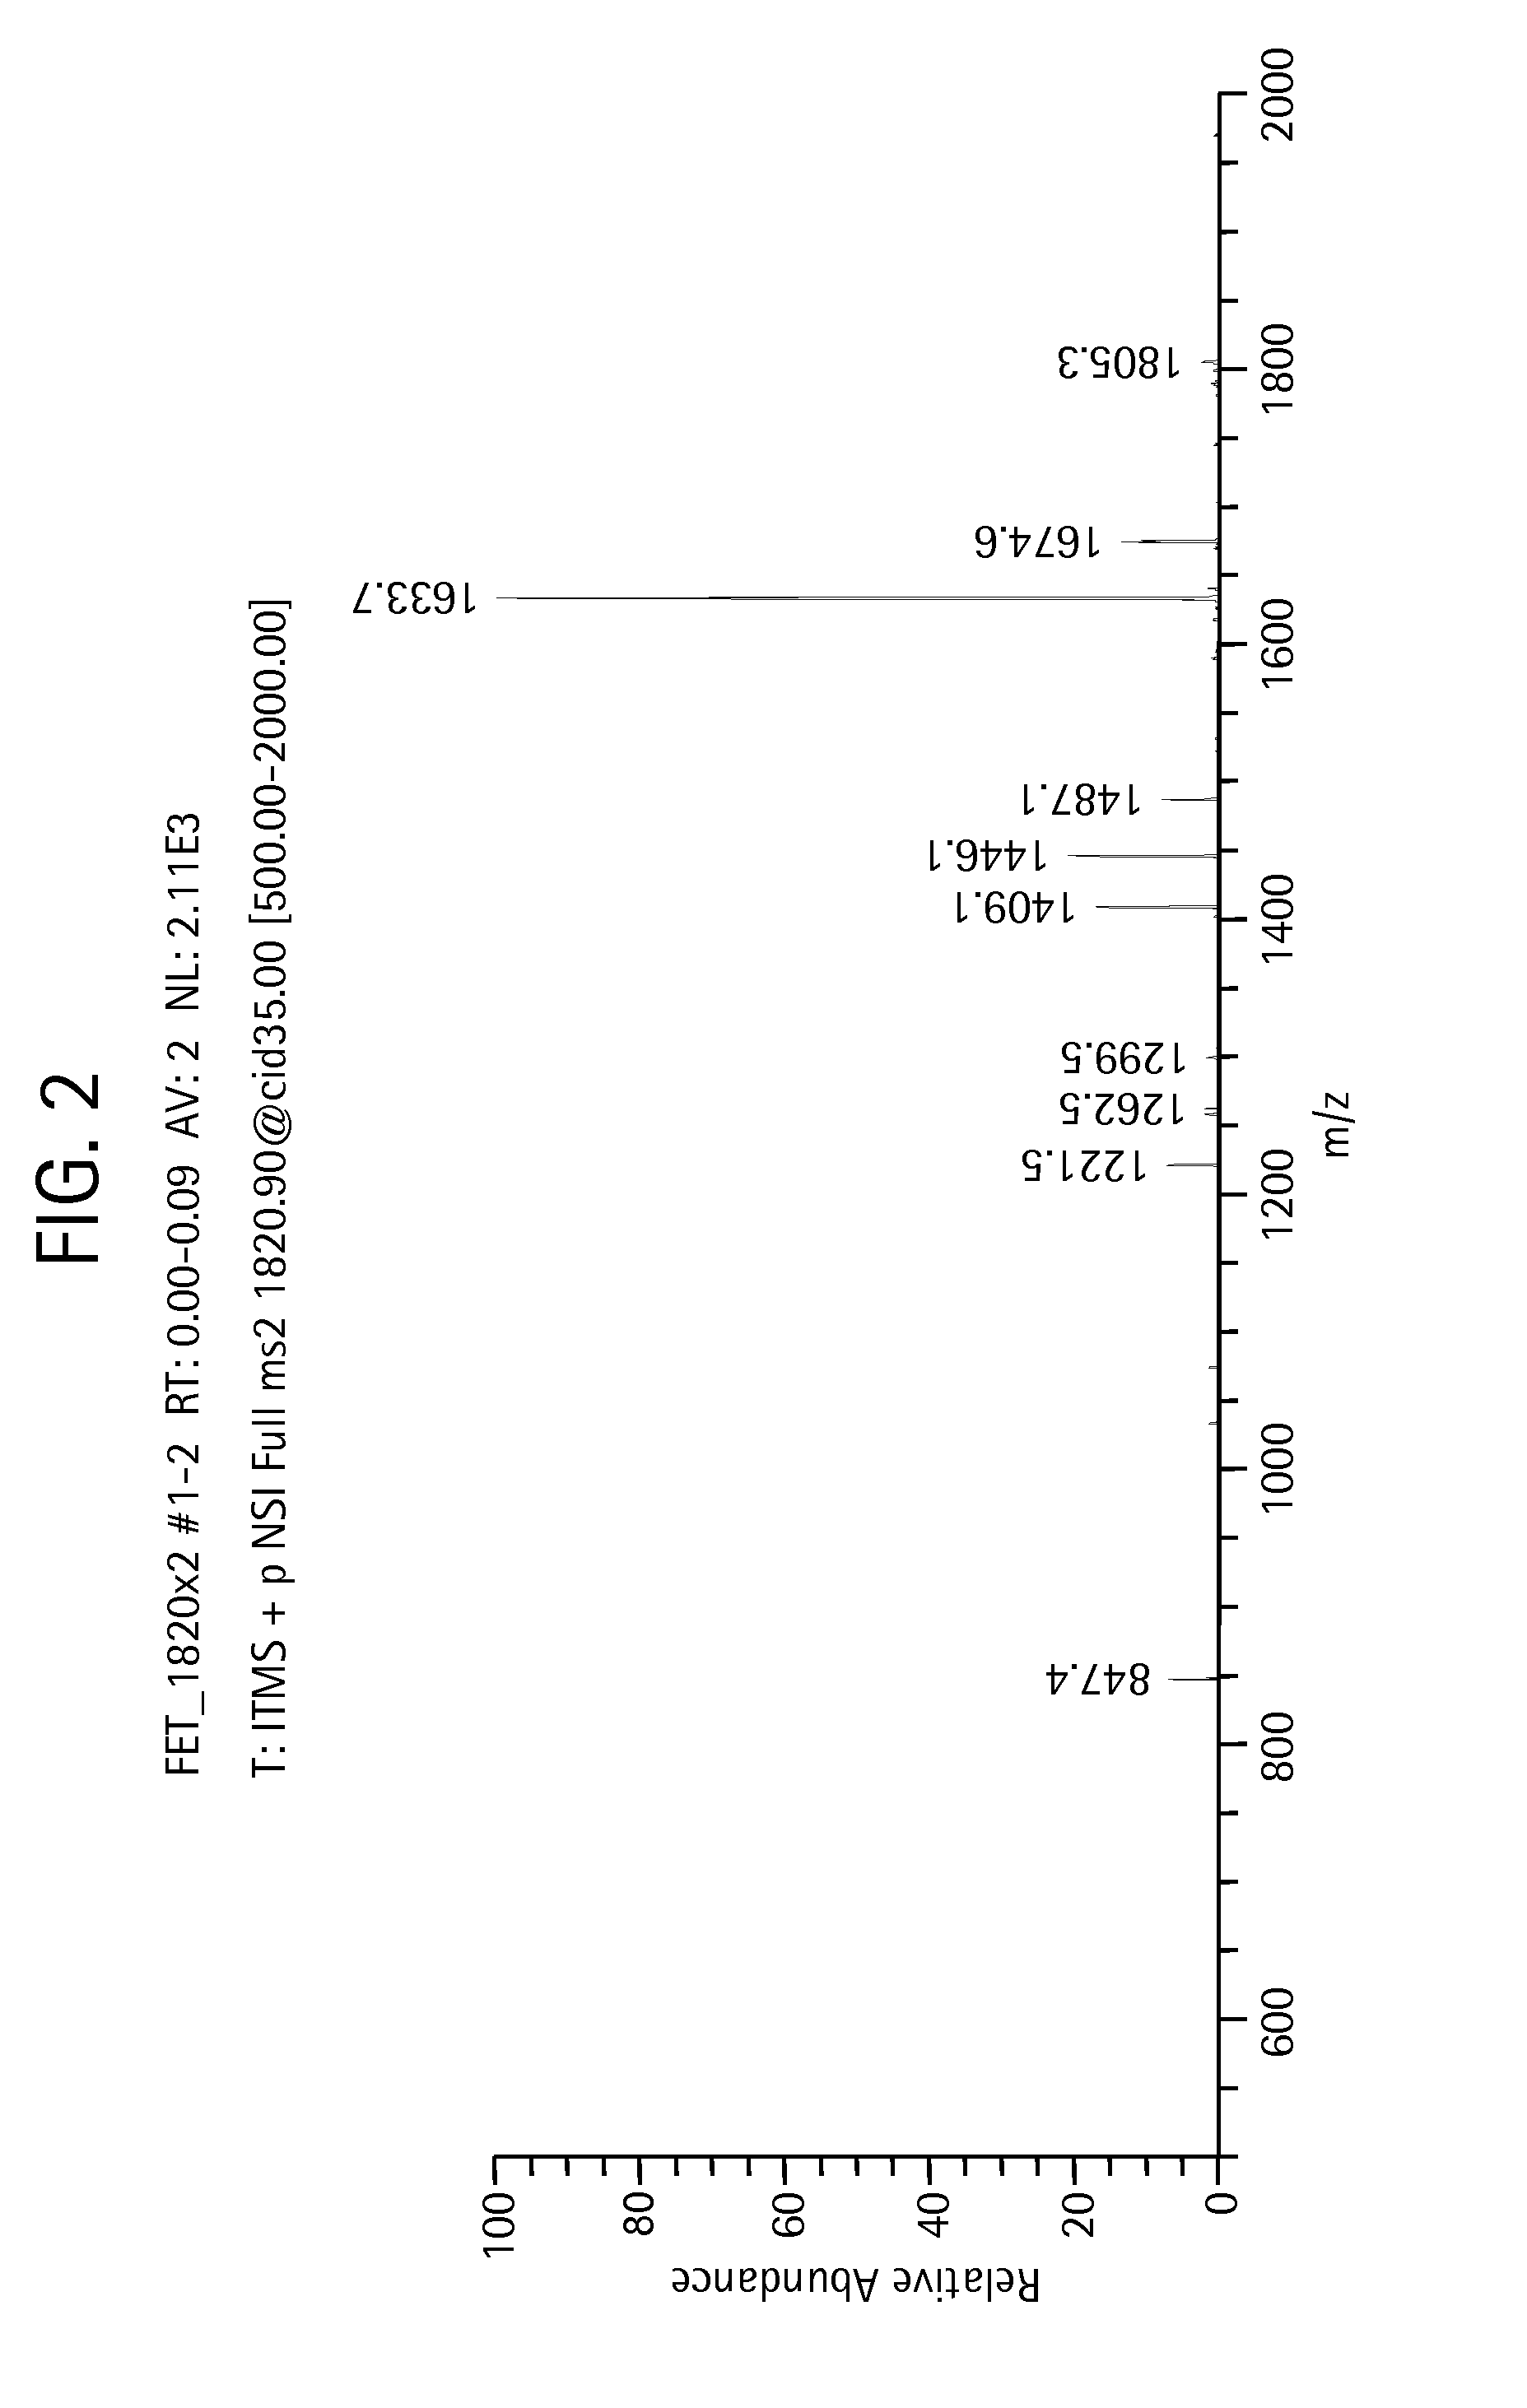 Methods for structural analysis of glycans